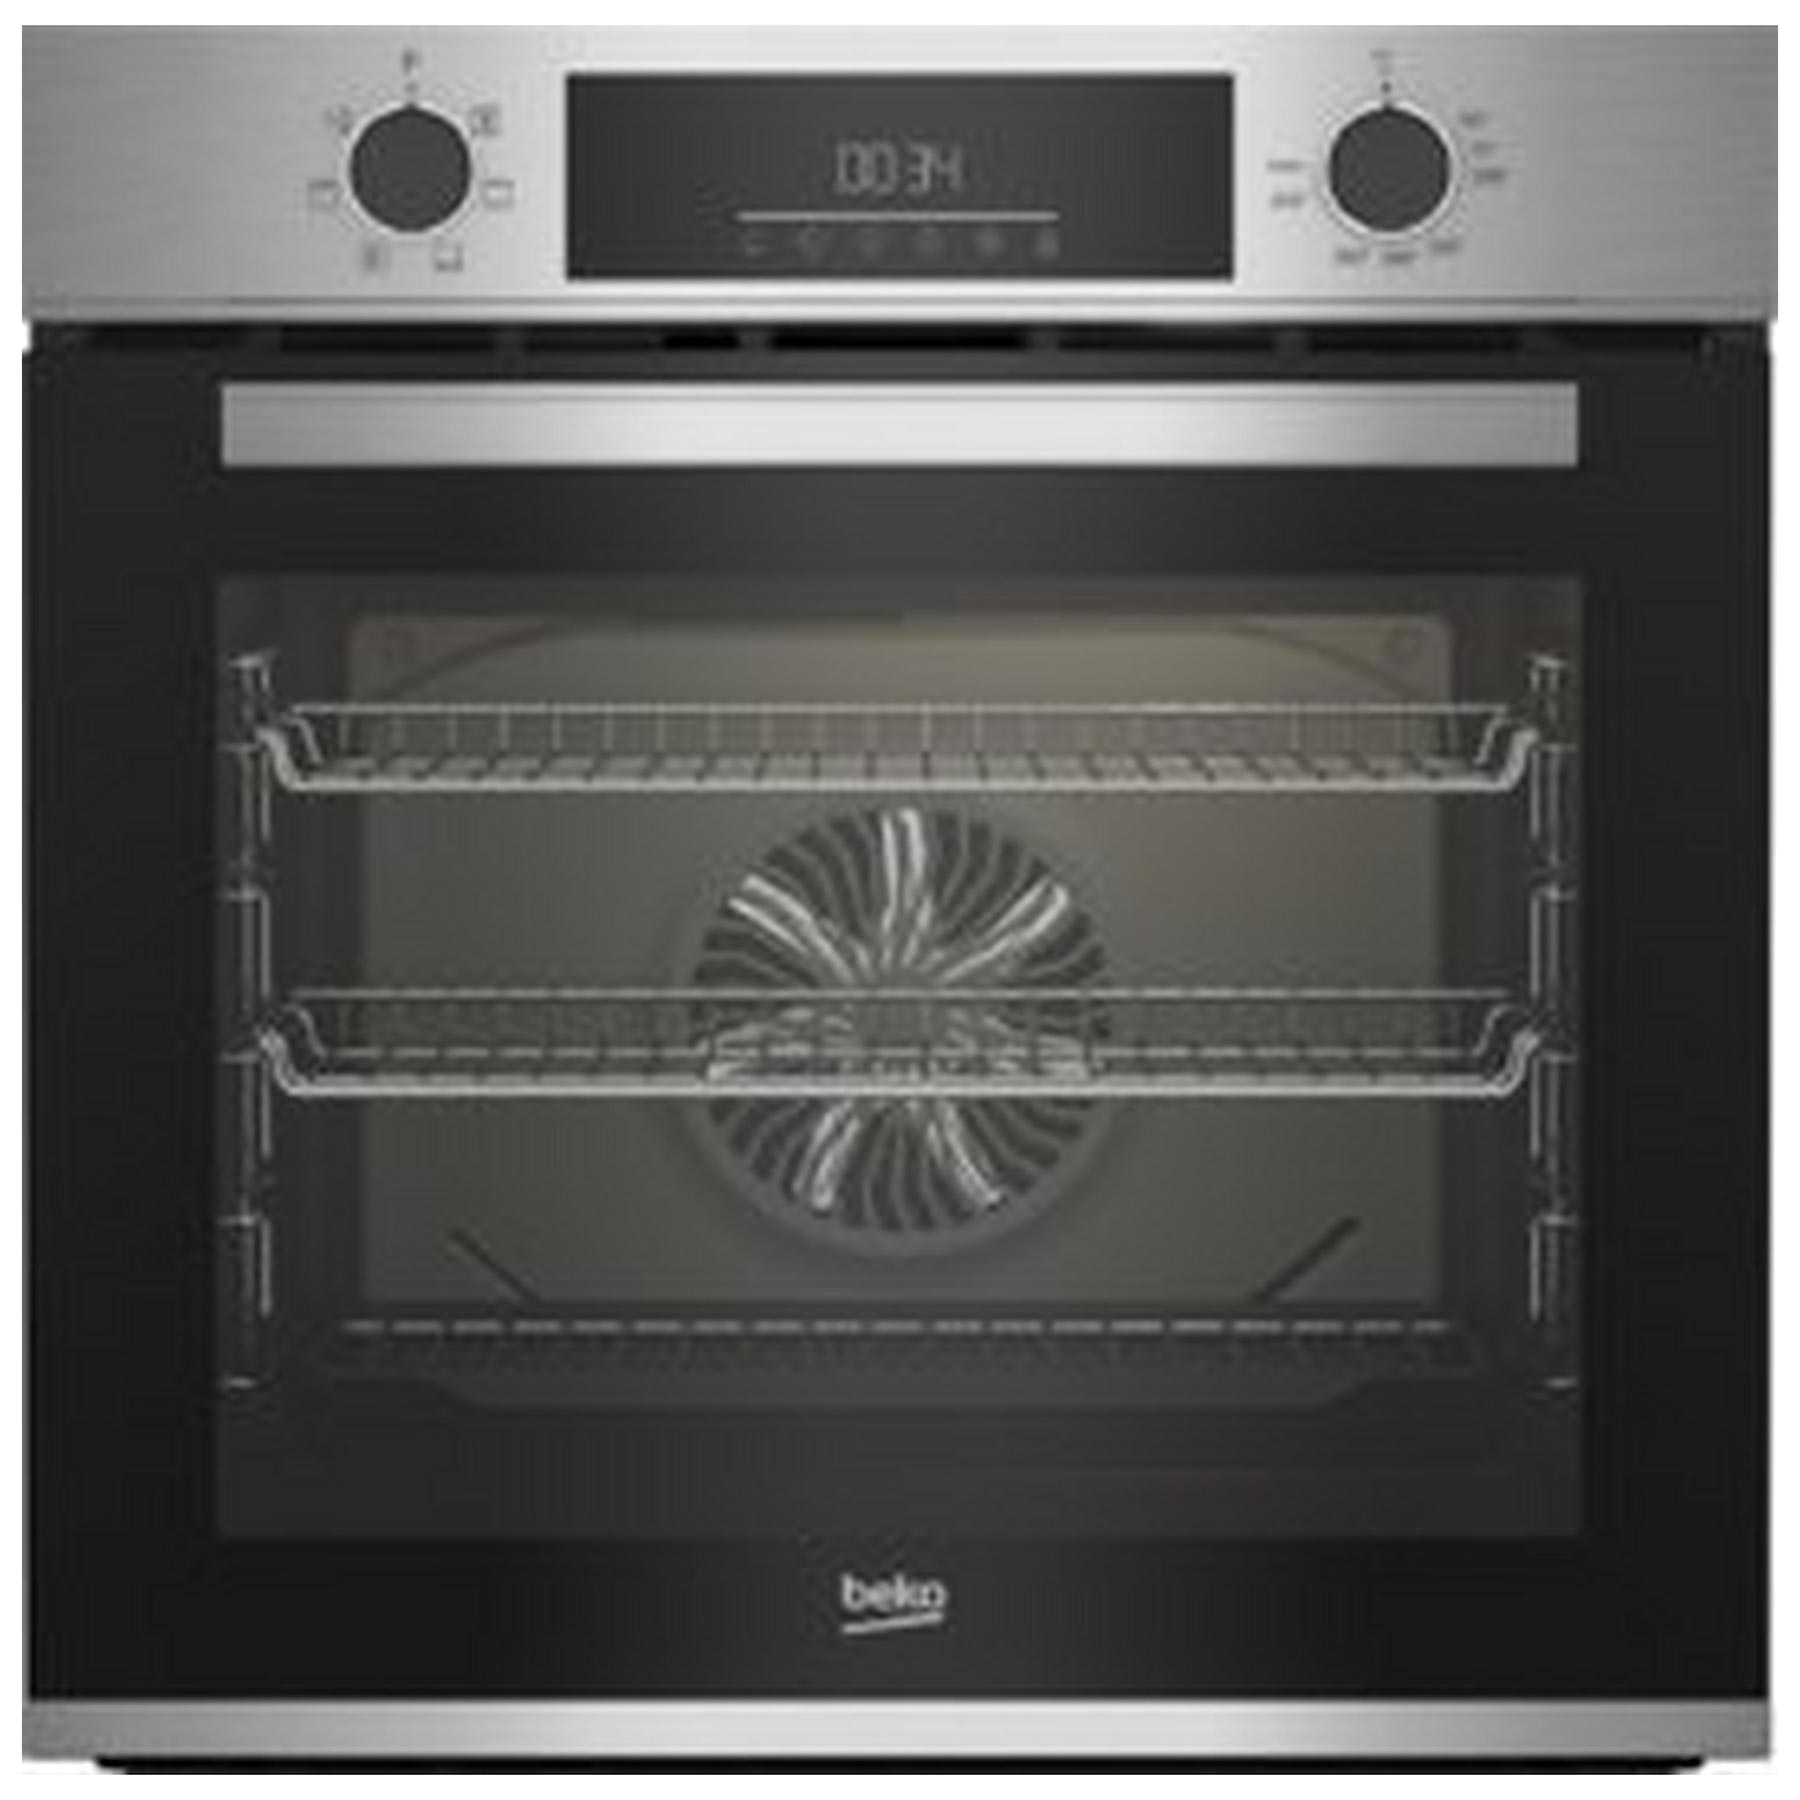 Beko CIMY92XP Built In Electric Single Oven in St Steel 72L A Rated